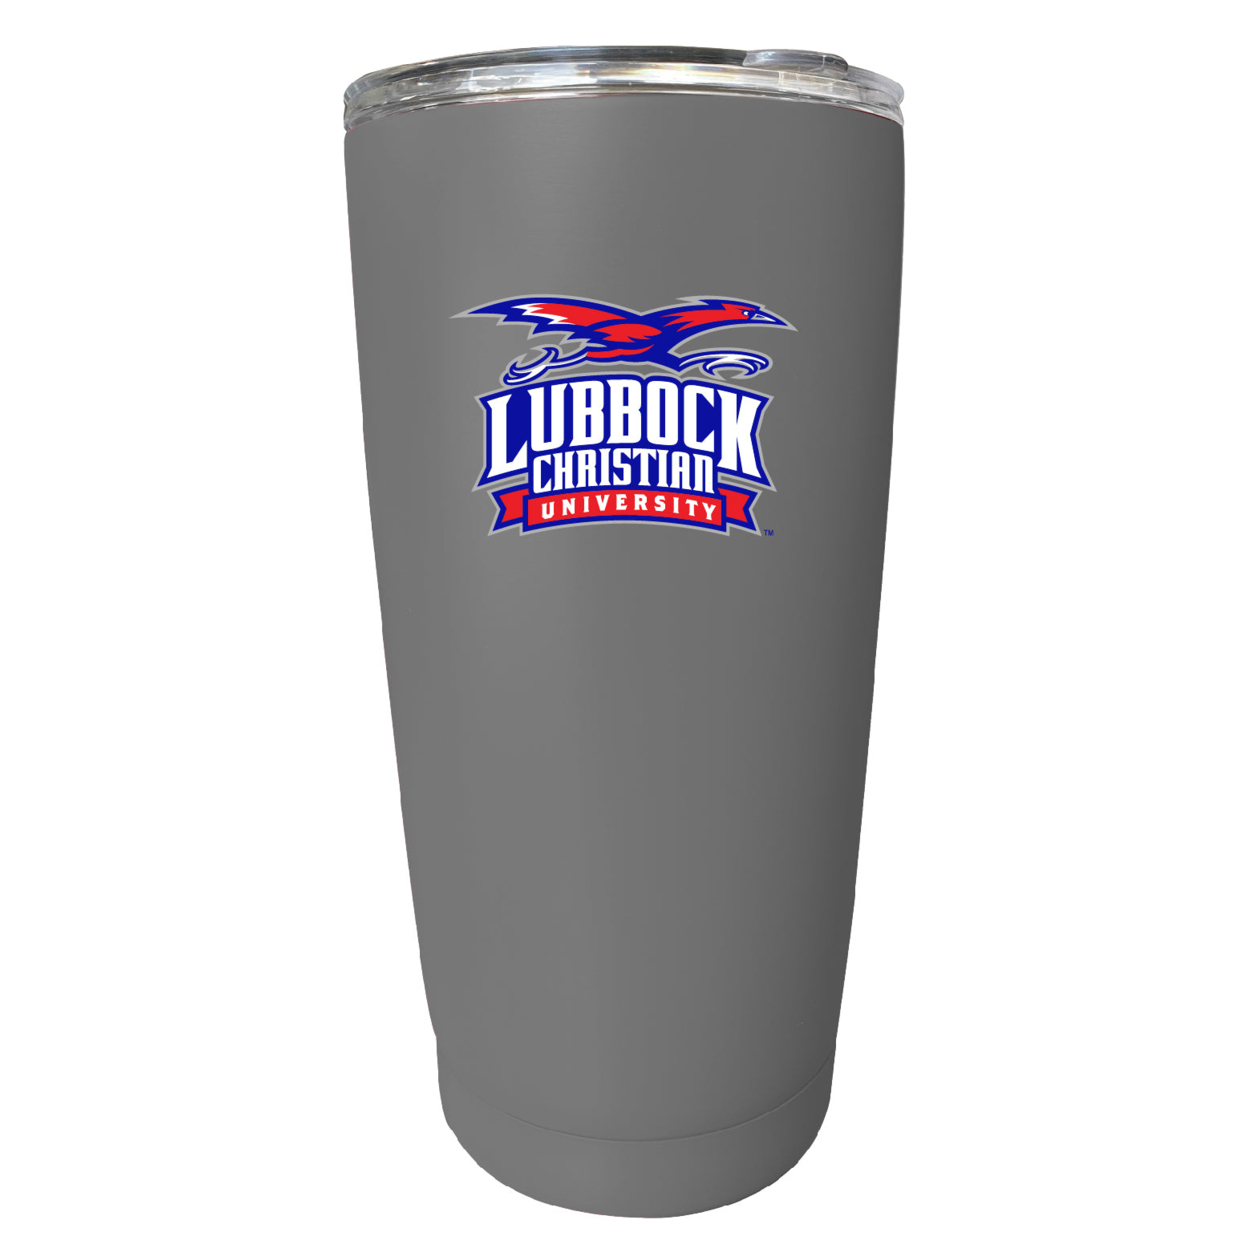 Lubbock Christian University Chaparral 16 Oz Stainless Steel Insulated Tumbler - Gray